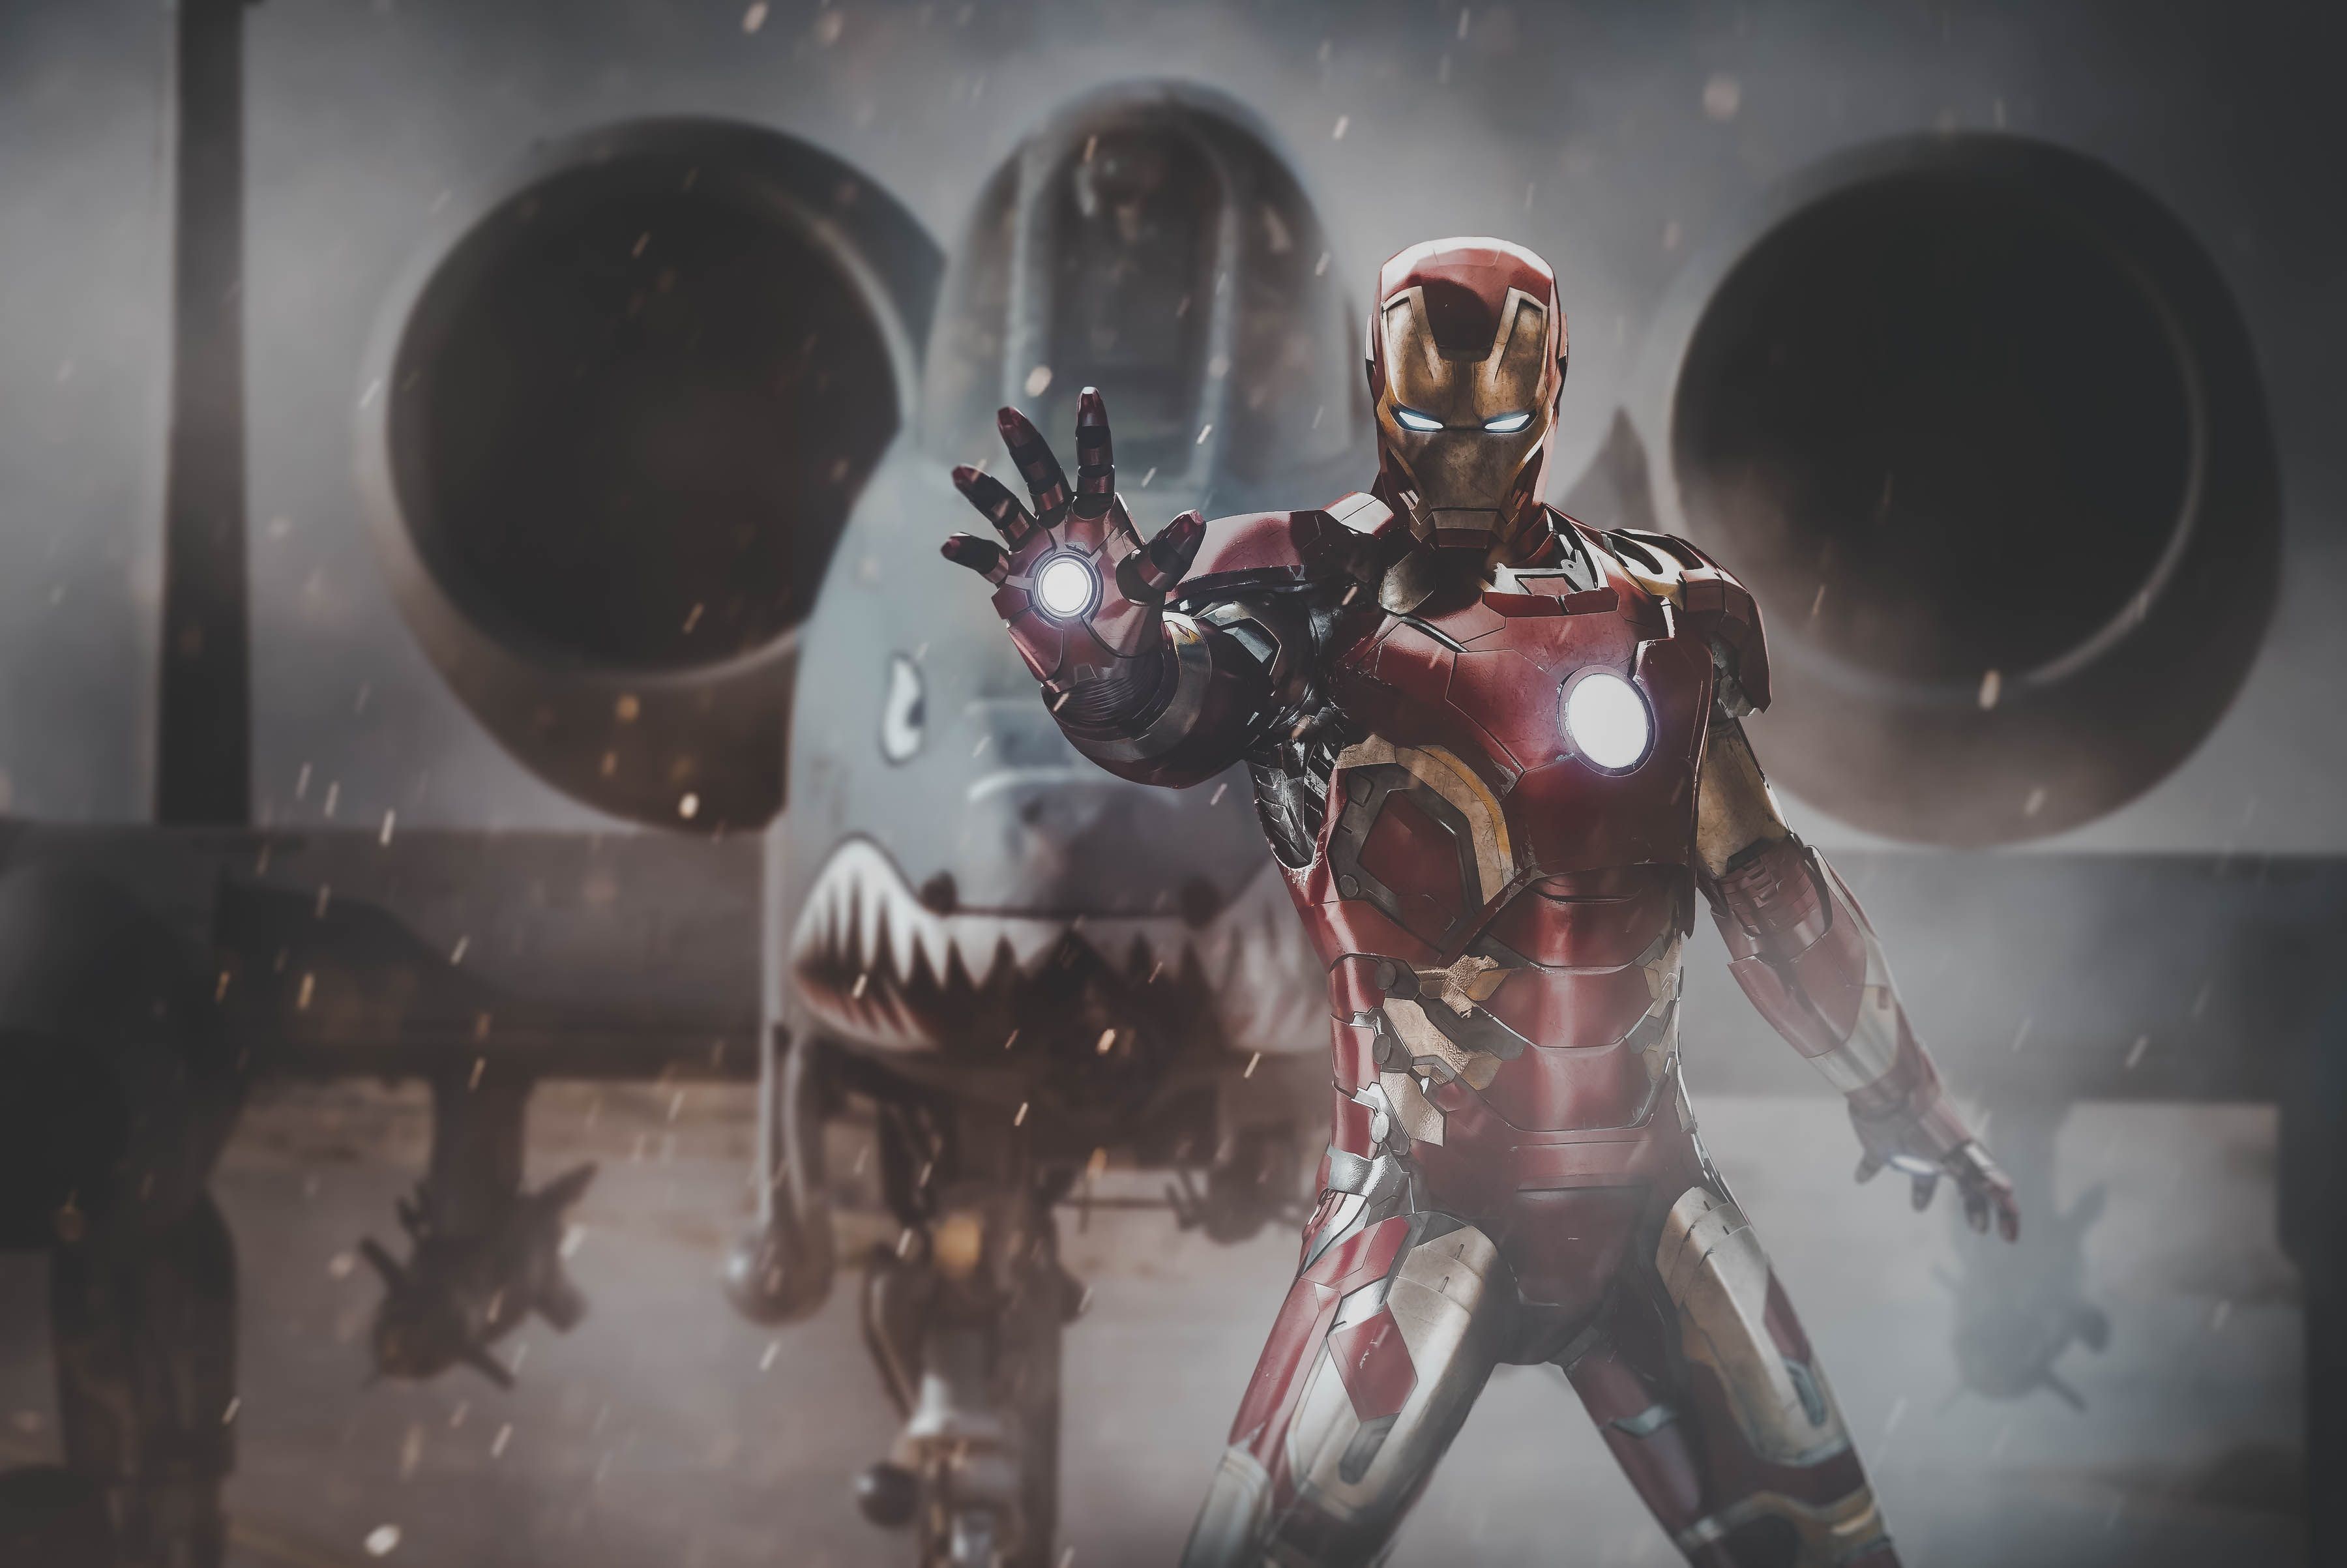 Iron 4K wallpaper for your desktop or mobile screen free and easy to download